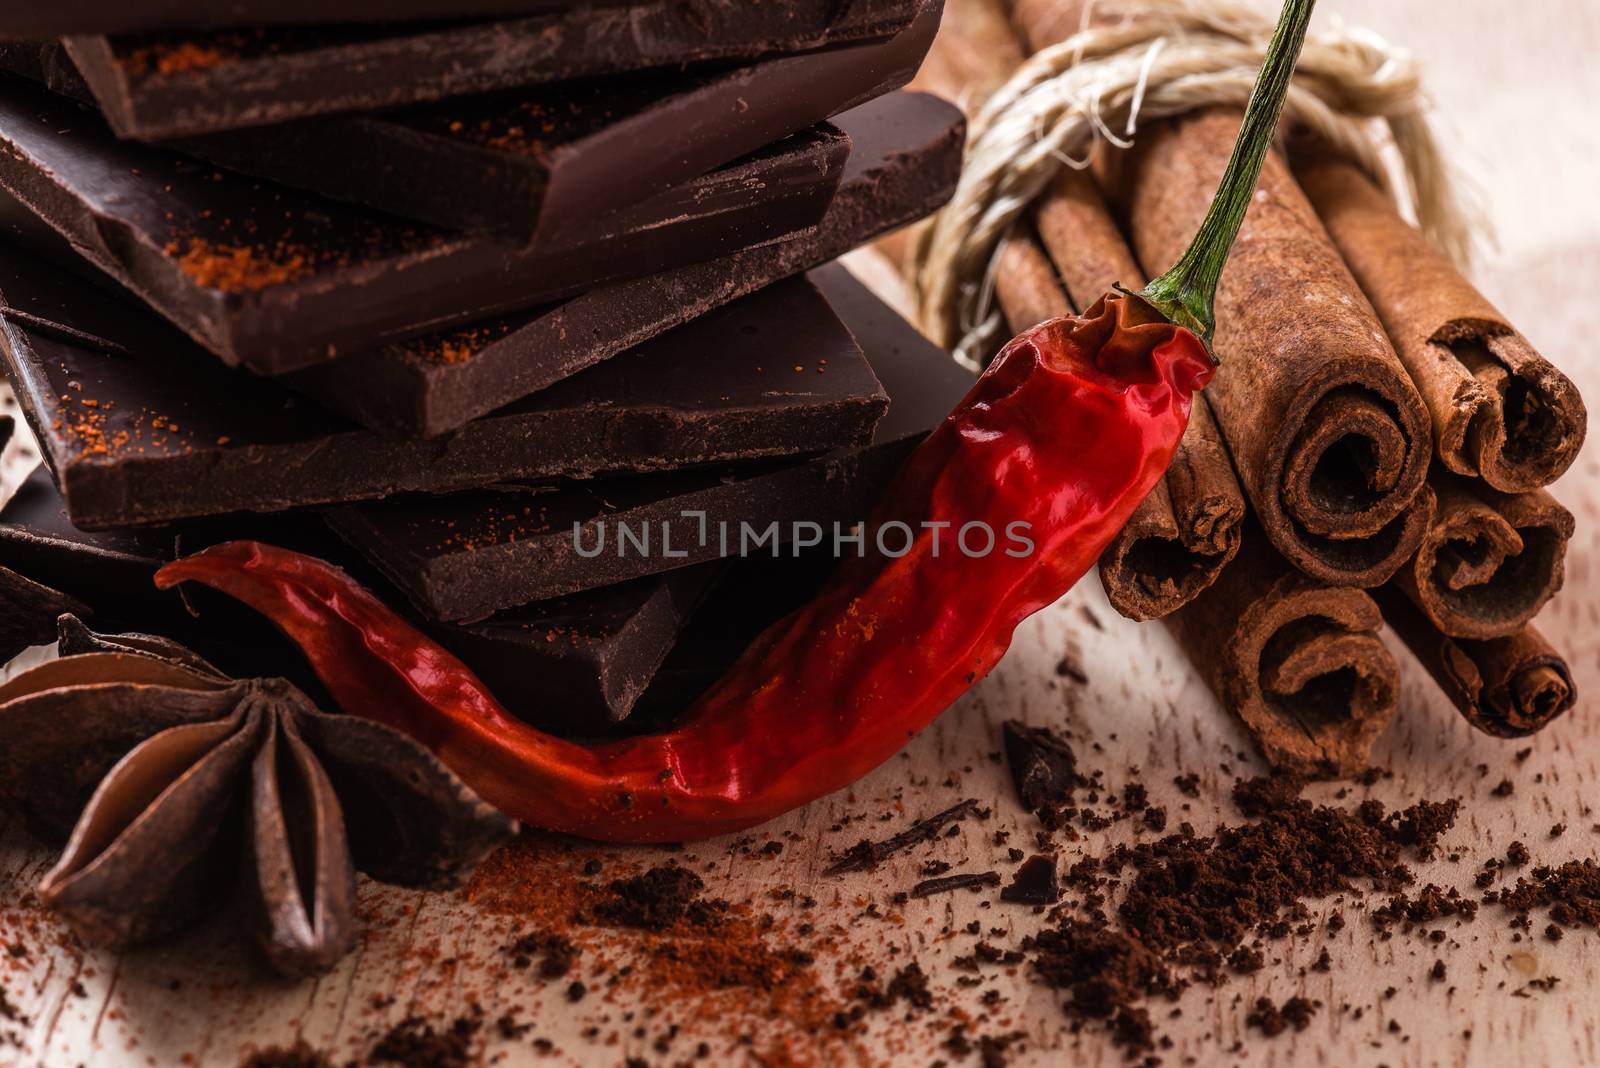 Red Chili Pepper with Chocolate by Seva_blsv